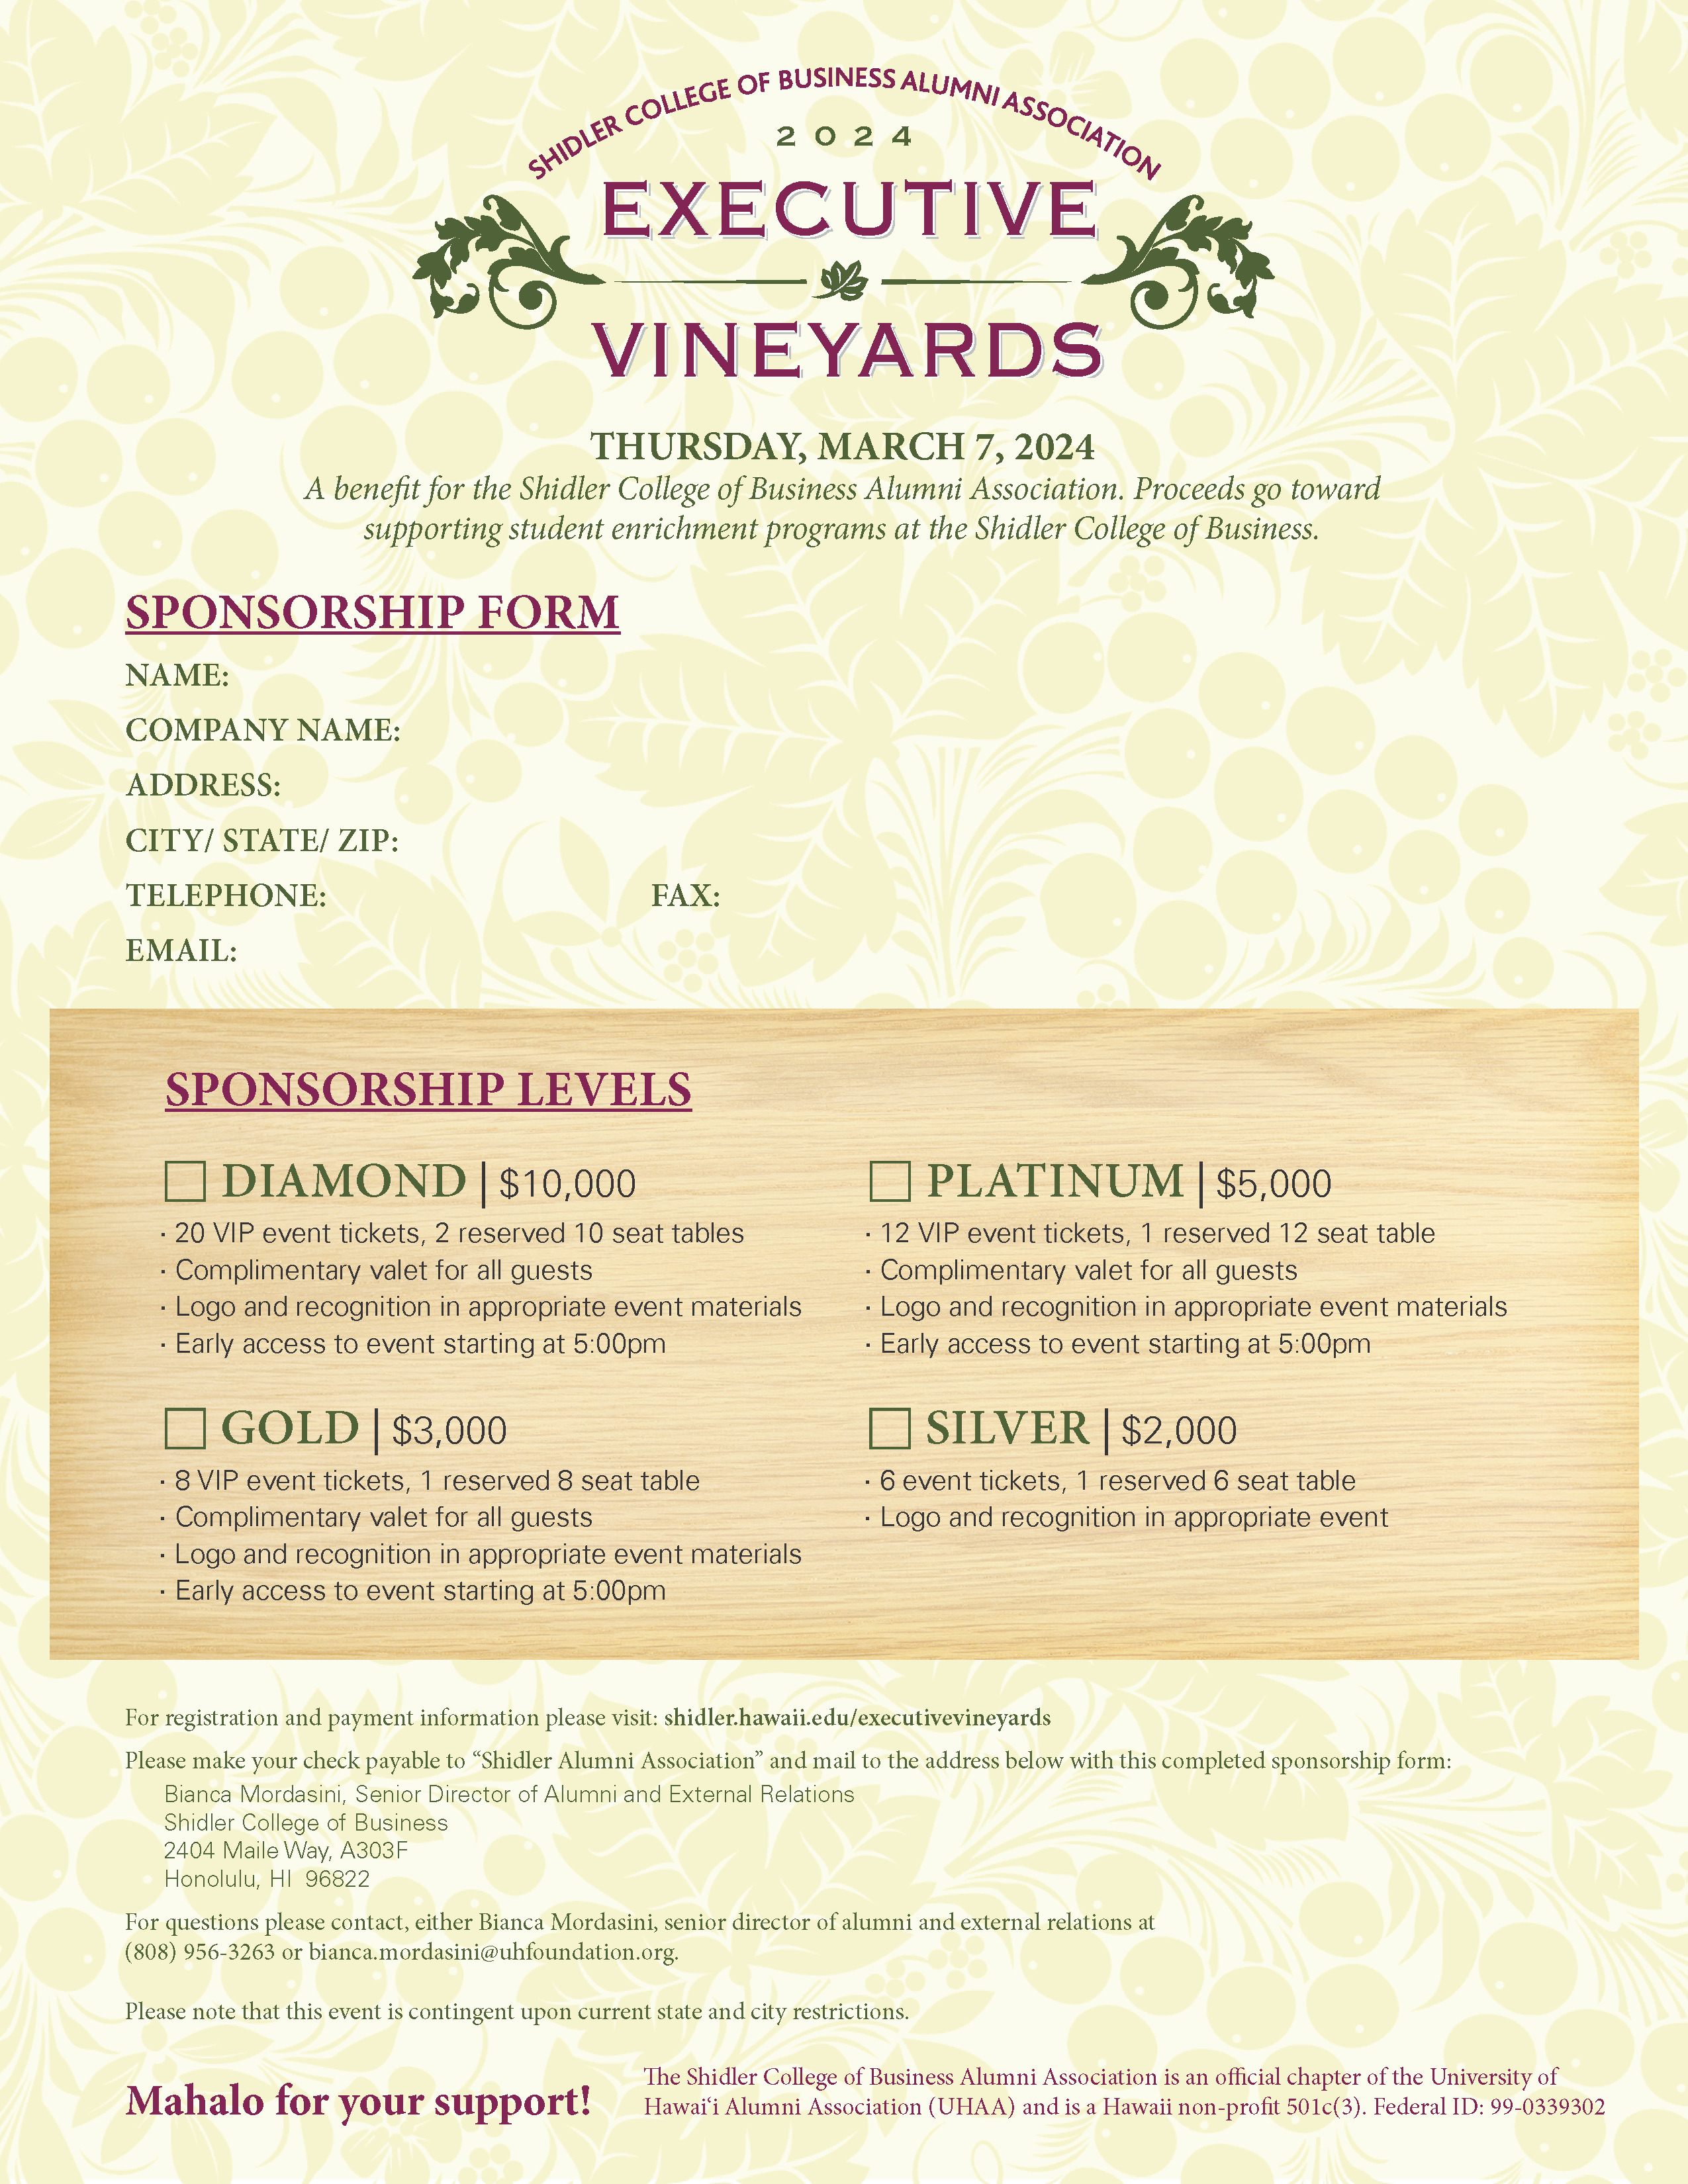 Screenshtot of this year's Executive Vineyards Flyer.